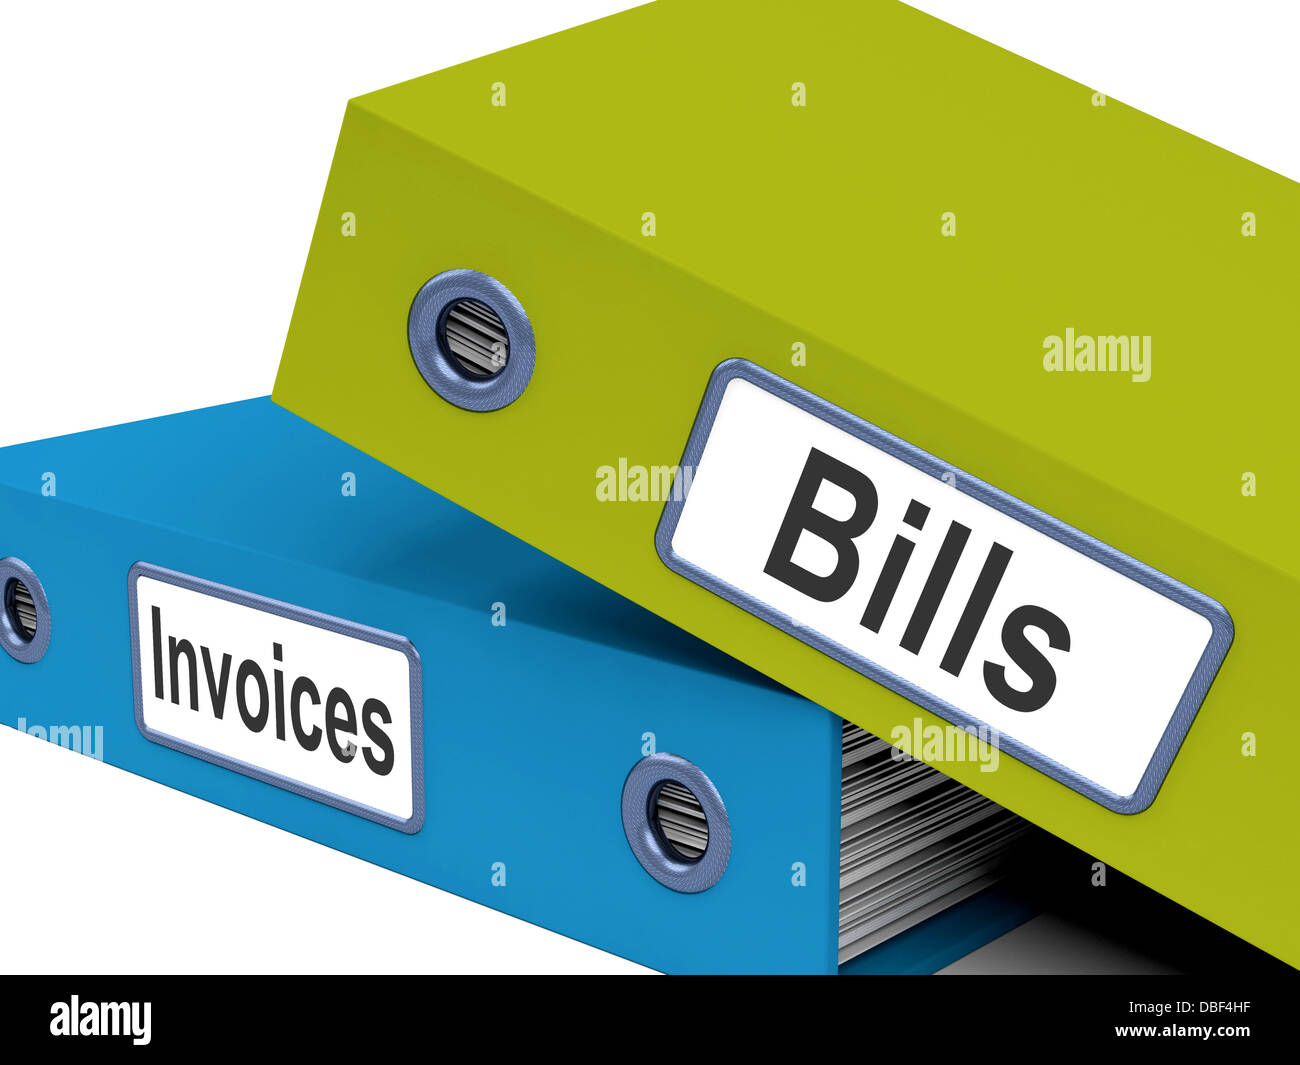 Bills And Invoices Files Show Accounting And Expenses Stock Photo